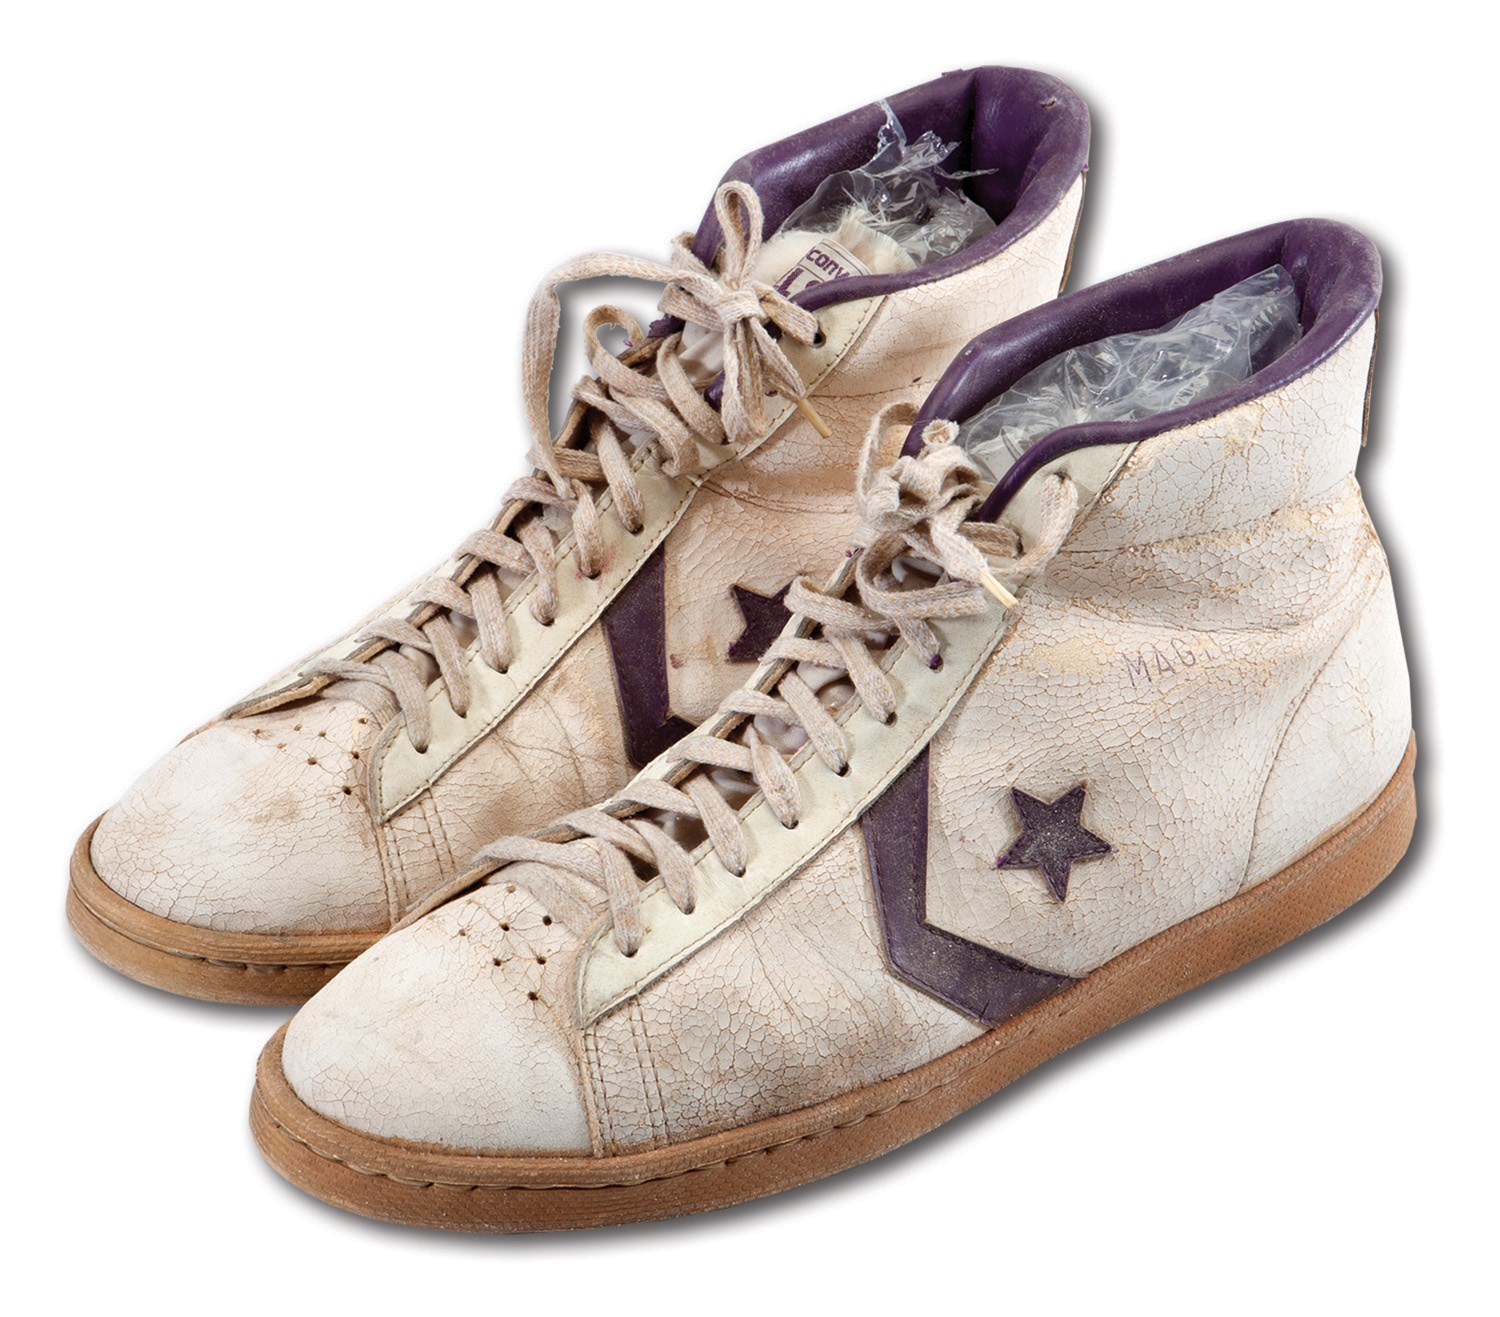 Lot Detail - 1979-80 MAGIC JOHNSON ROOKIE SEASON GAME WORN CONVERSE SHOES  WITH POSSIBLE ATTRIBUTION TO THE 1980 NBA FINALS (DETAILED PROVENANCE  DOCUMENTATION)